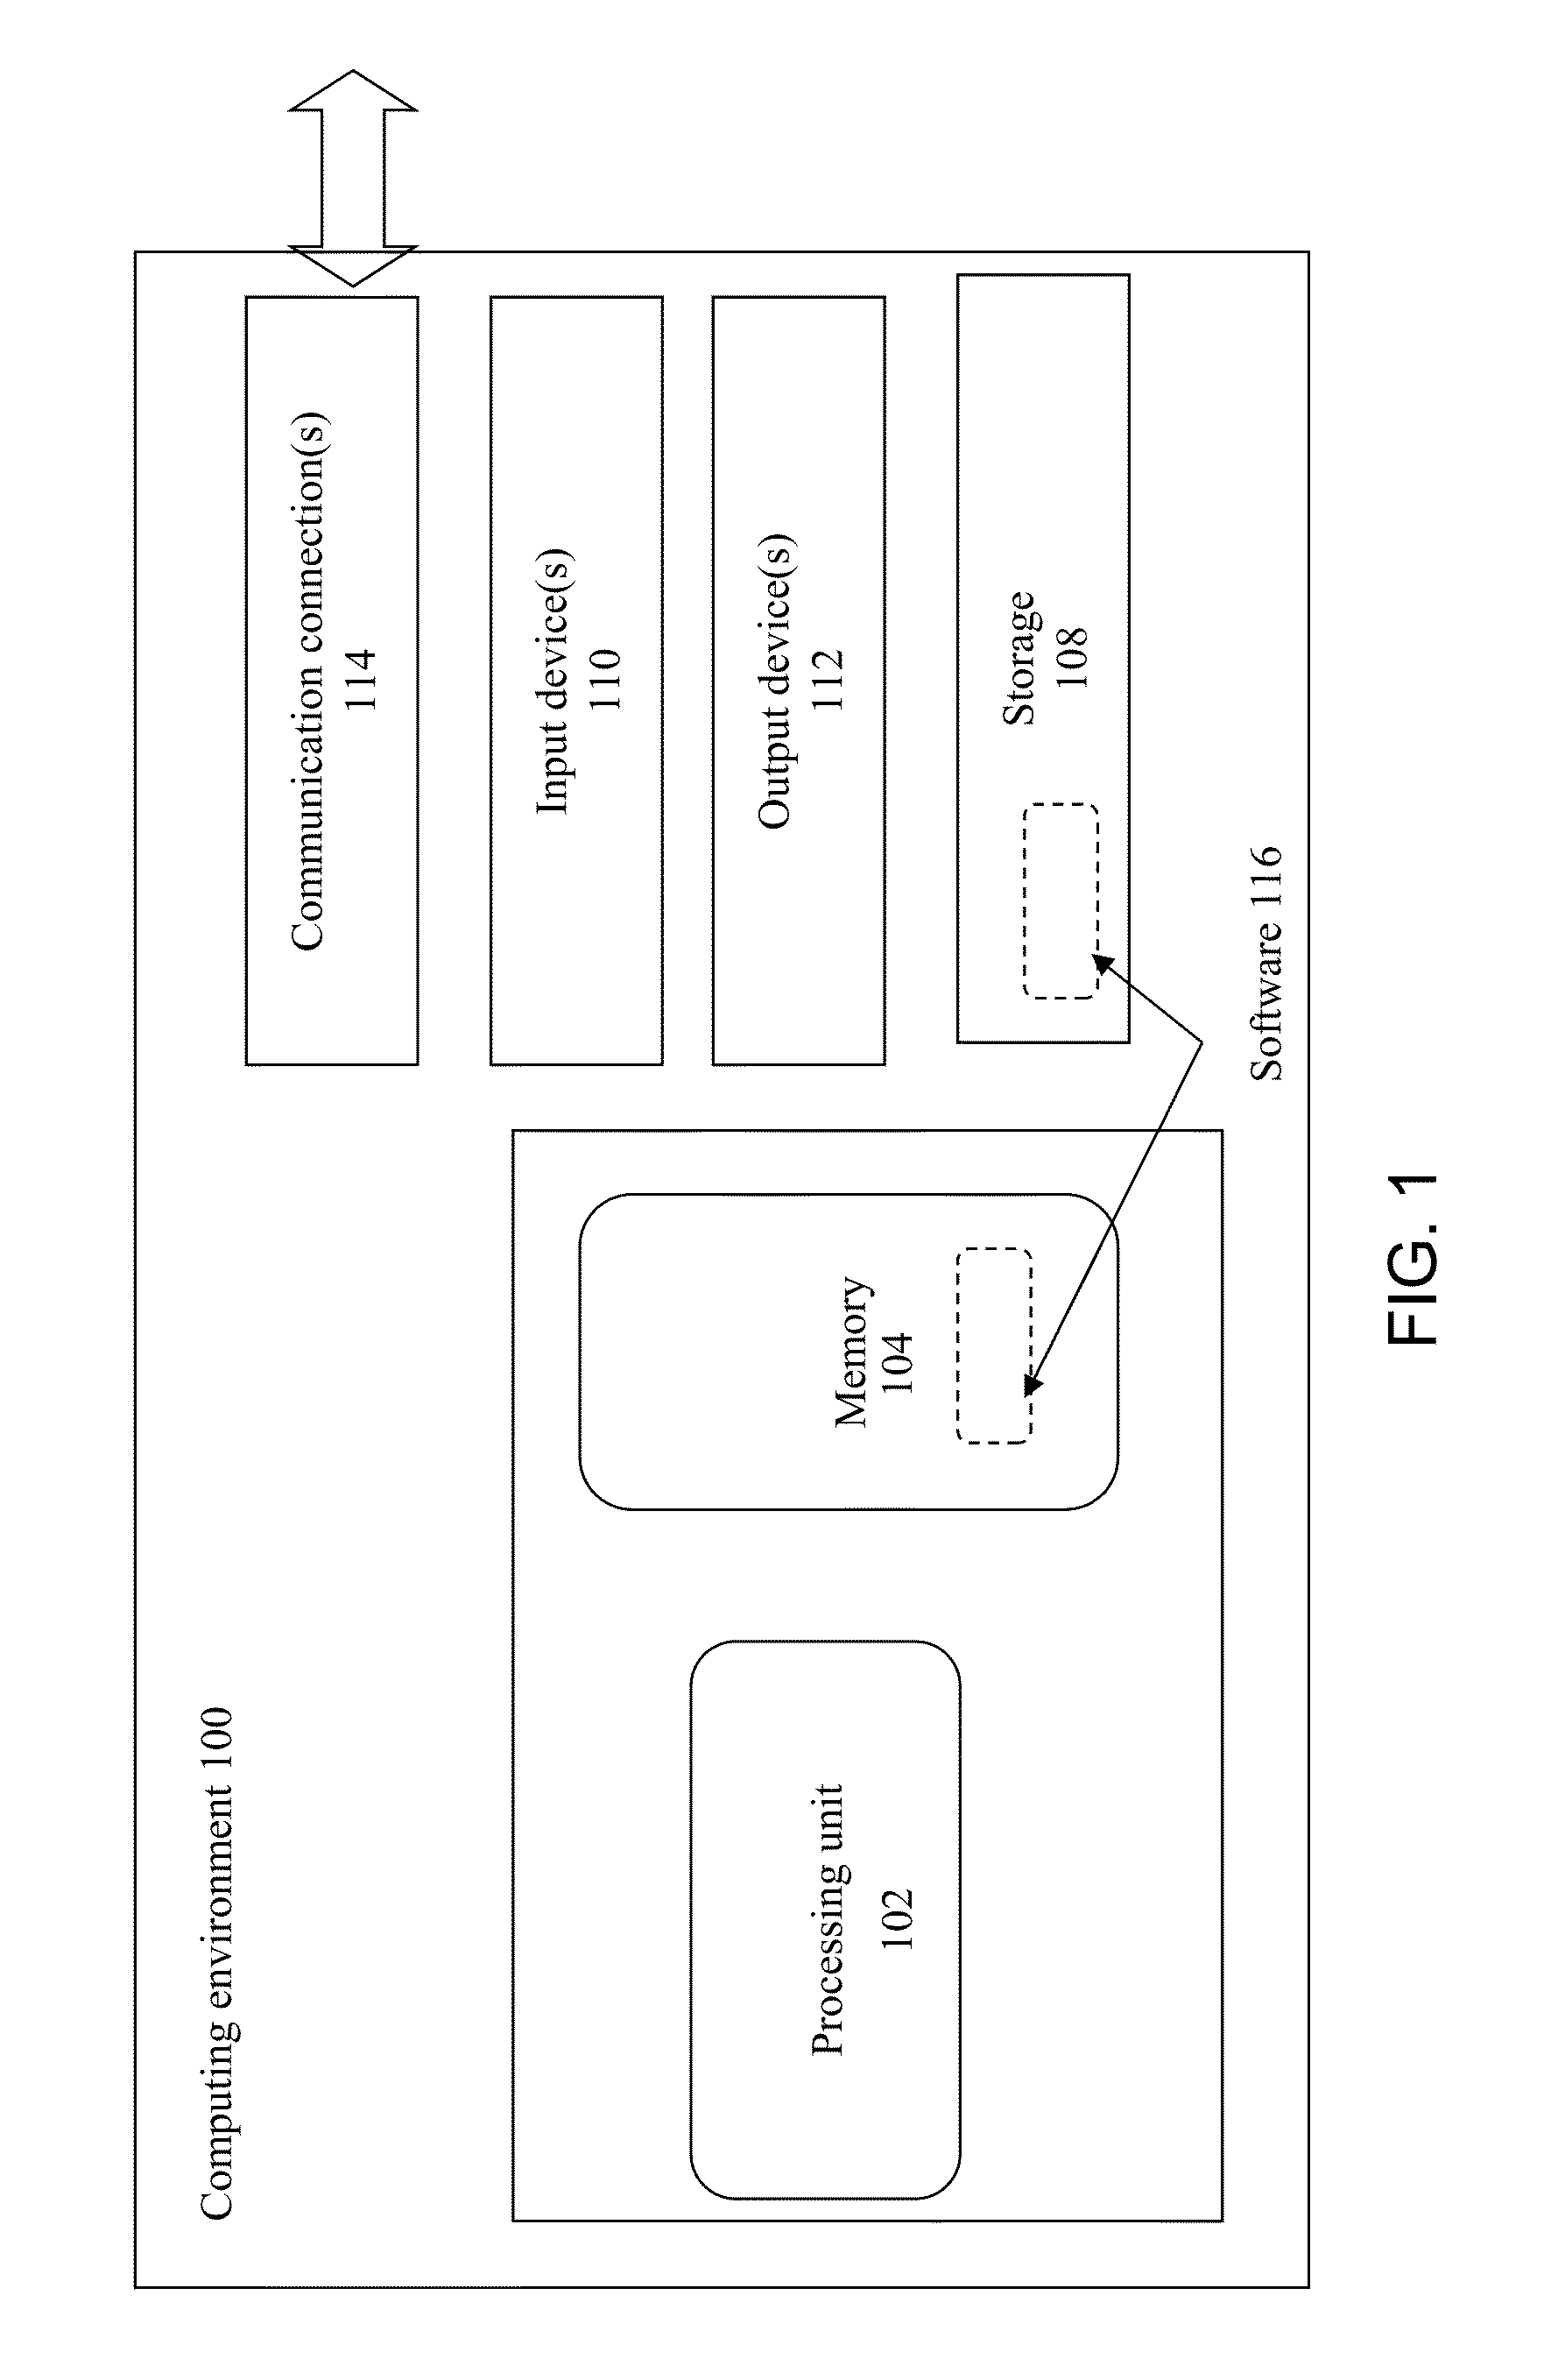 Systems and methods for correcting geometric distortions in videos and images